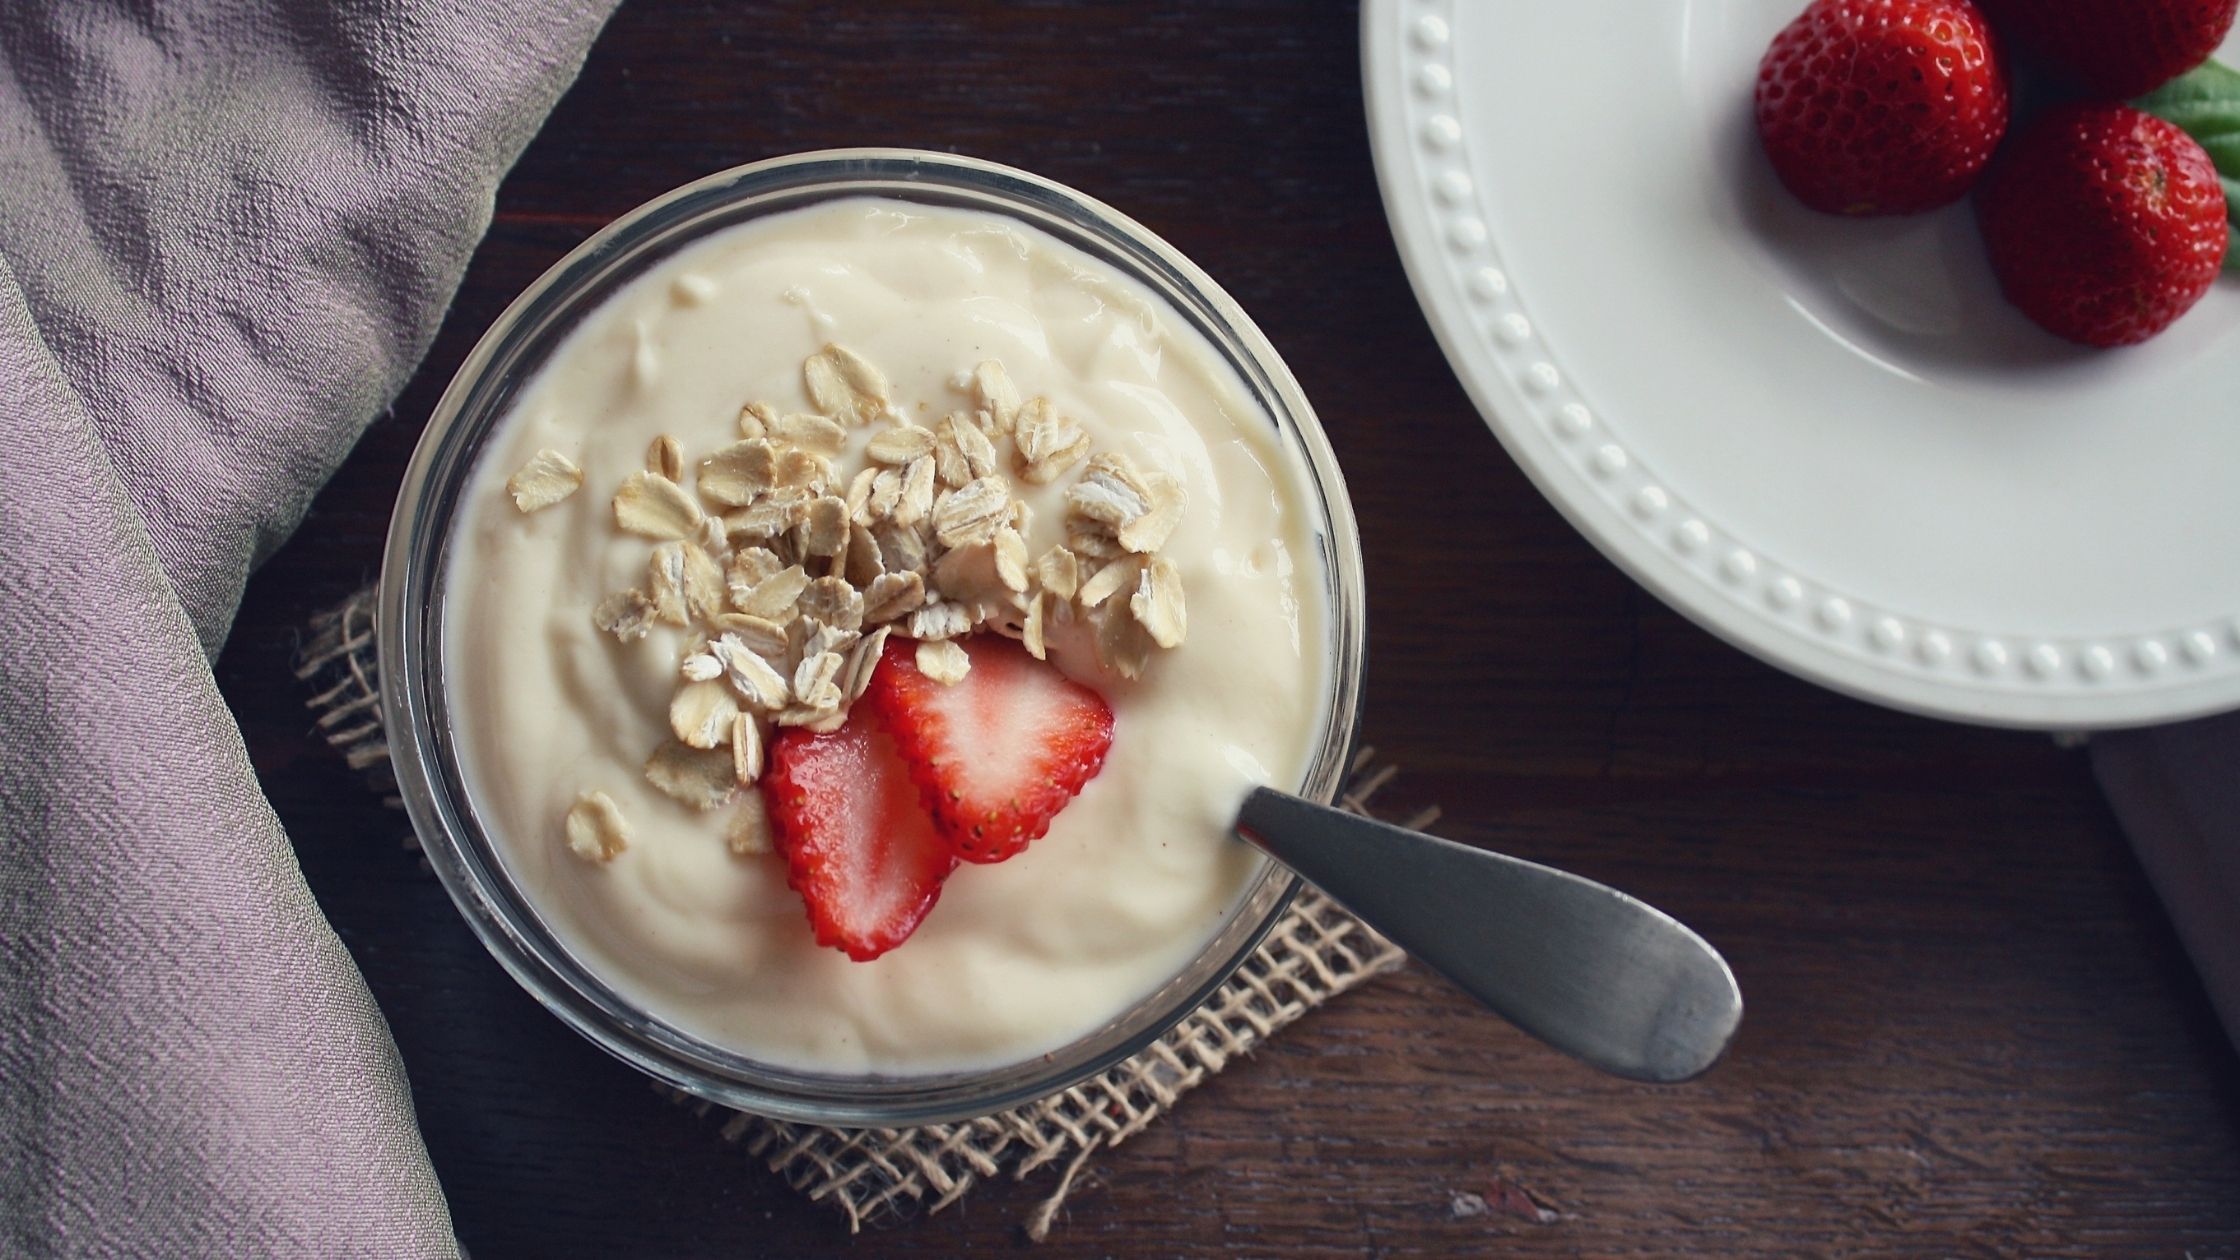 Overnight Oats and Me: Recipes and Ideas